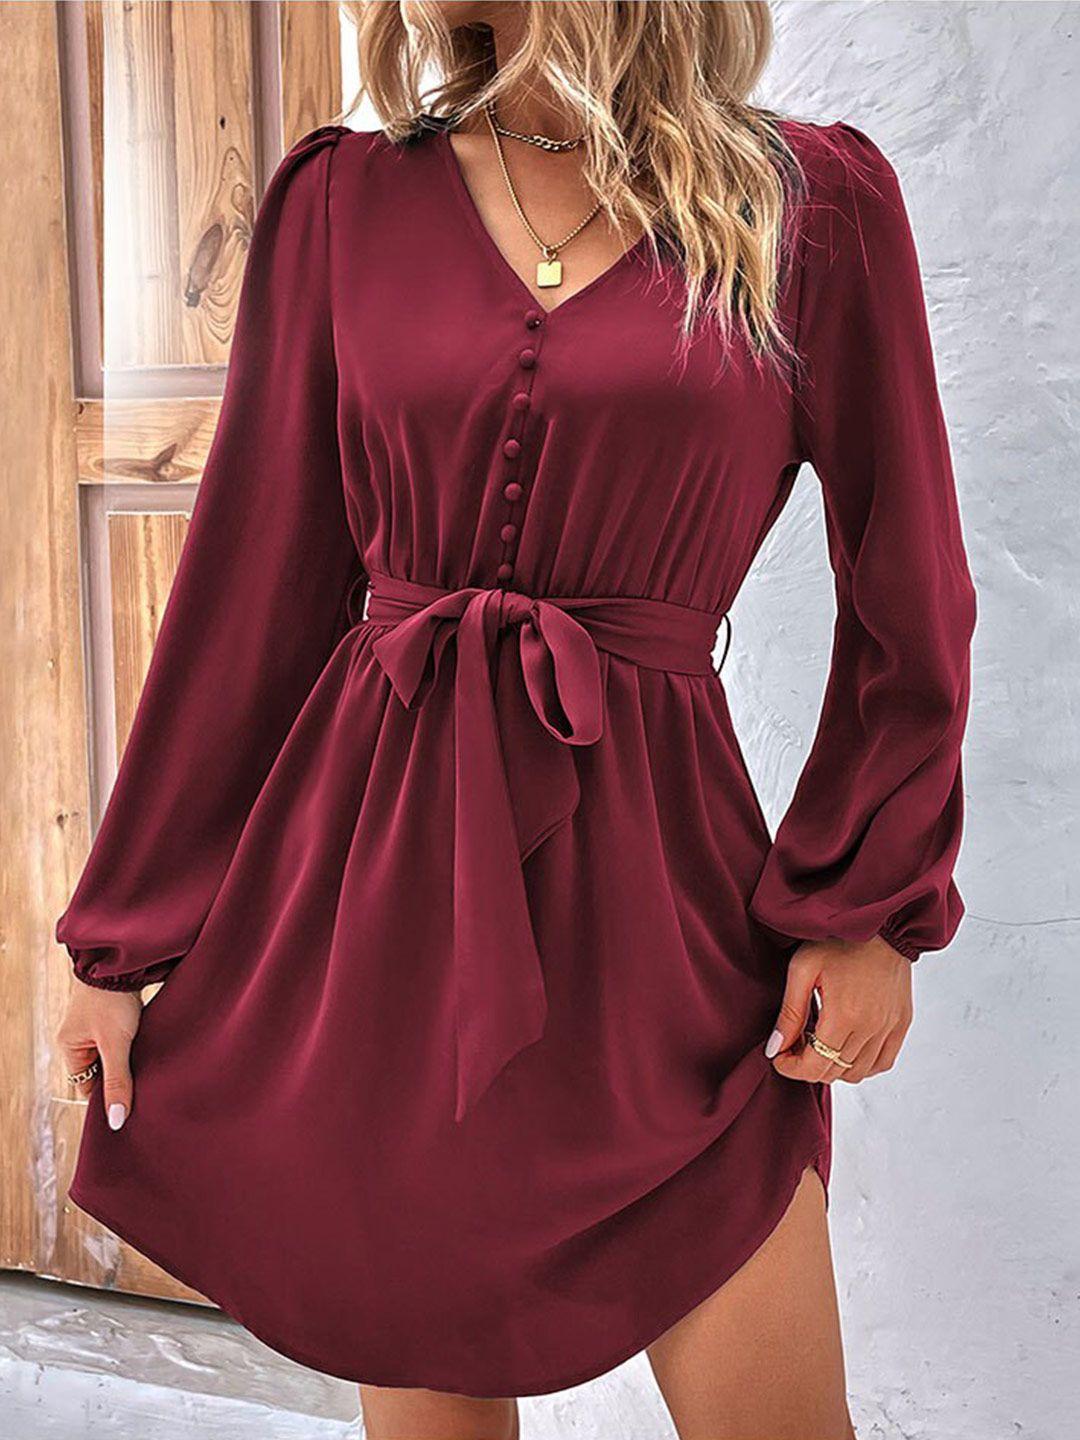 bostreet maroon v-neck puff sleeves casual fit & flare dress